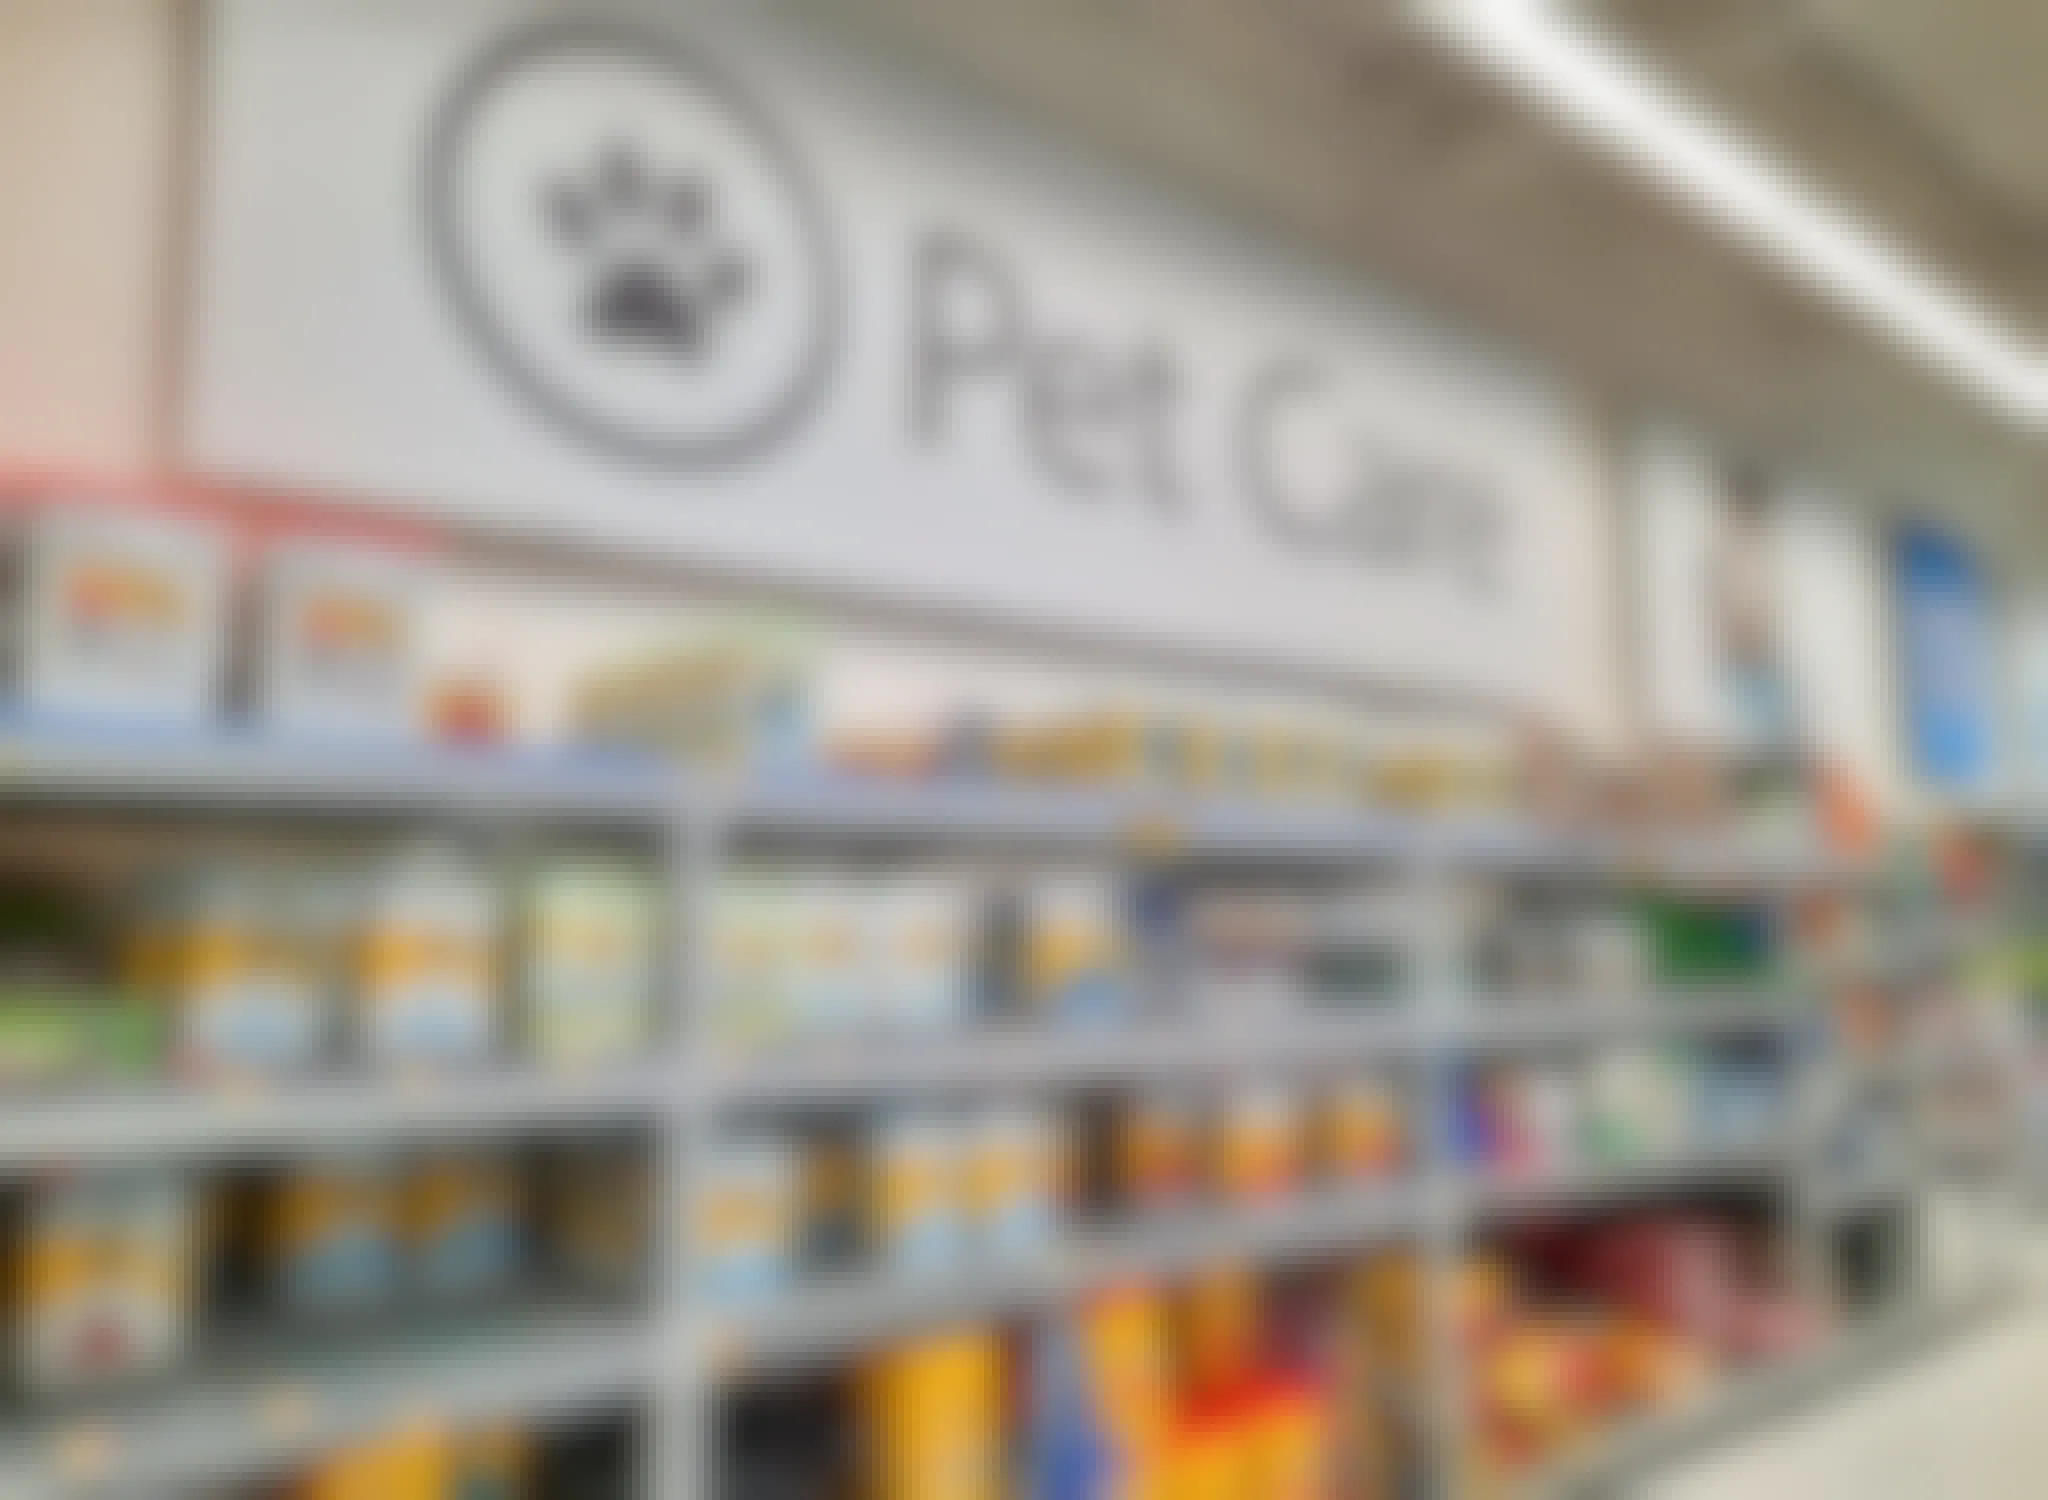 Pet Care sign above cat litter products at Walmart